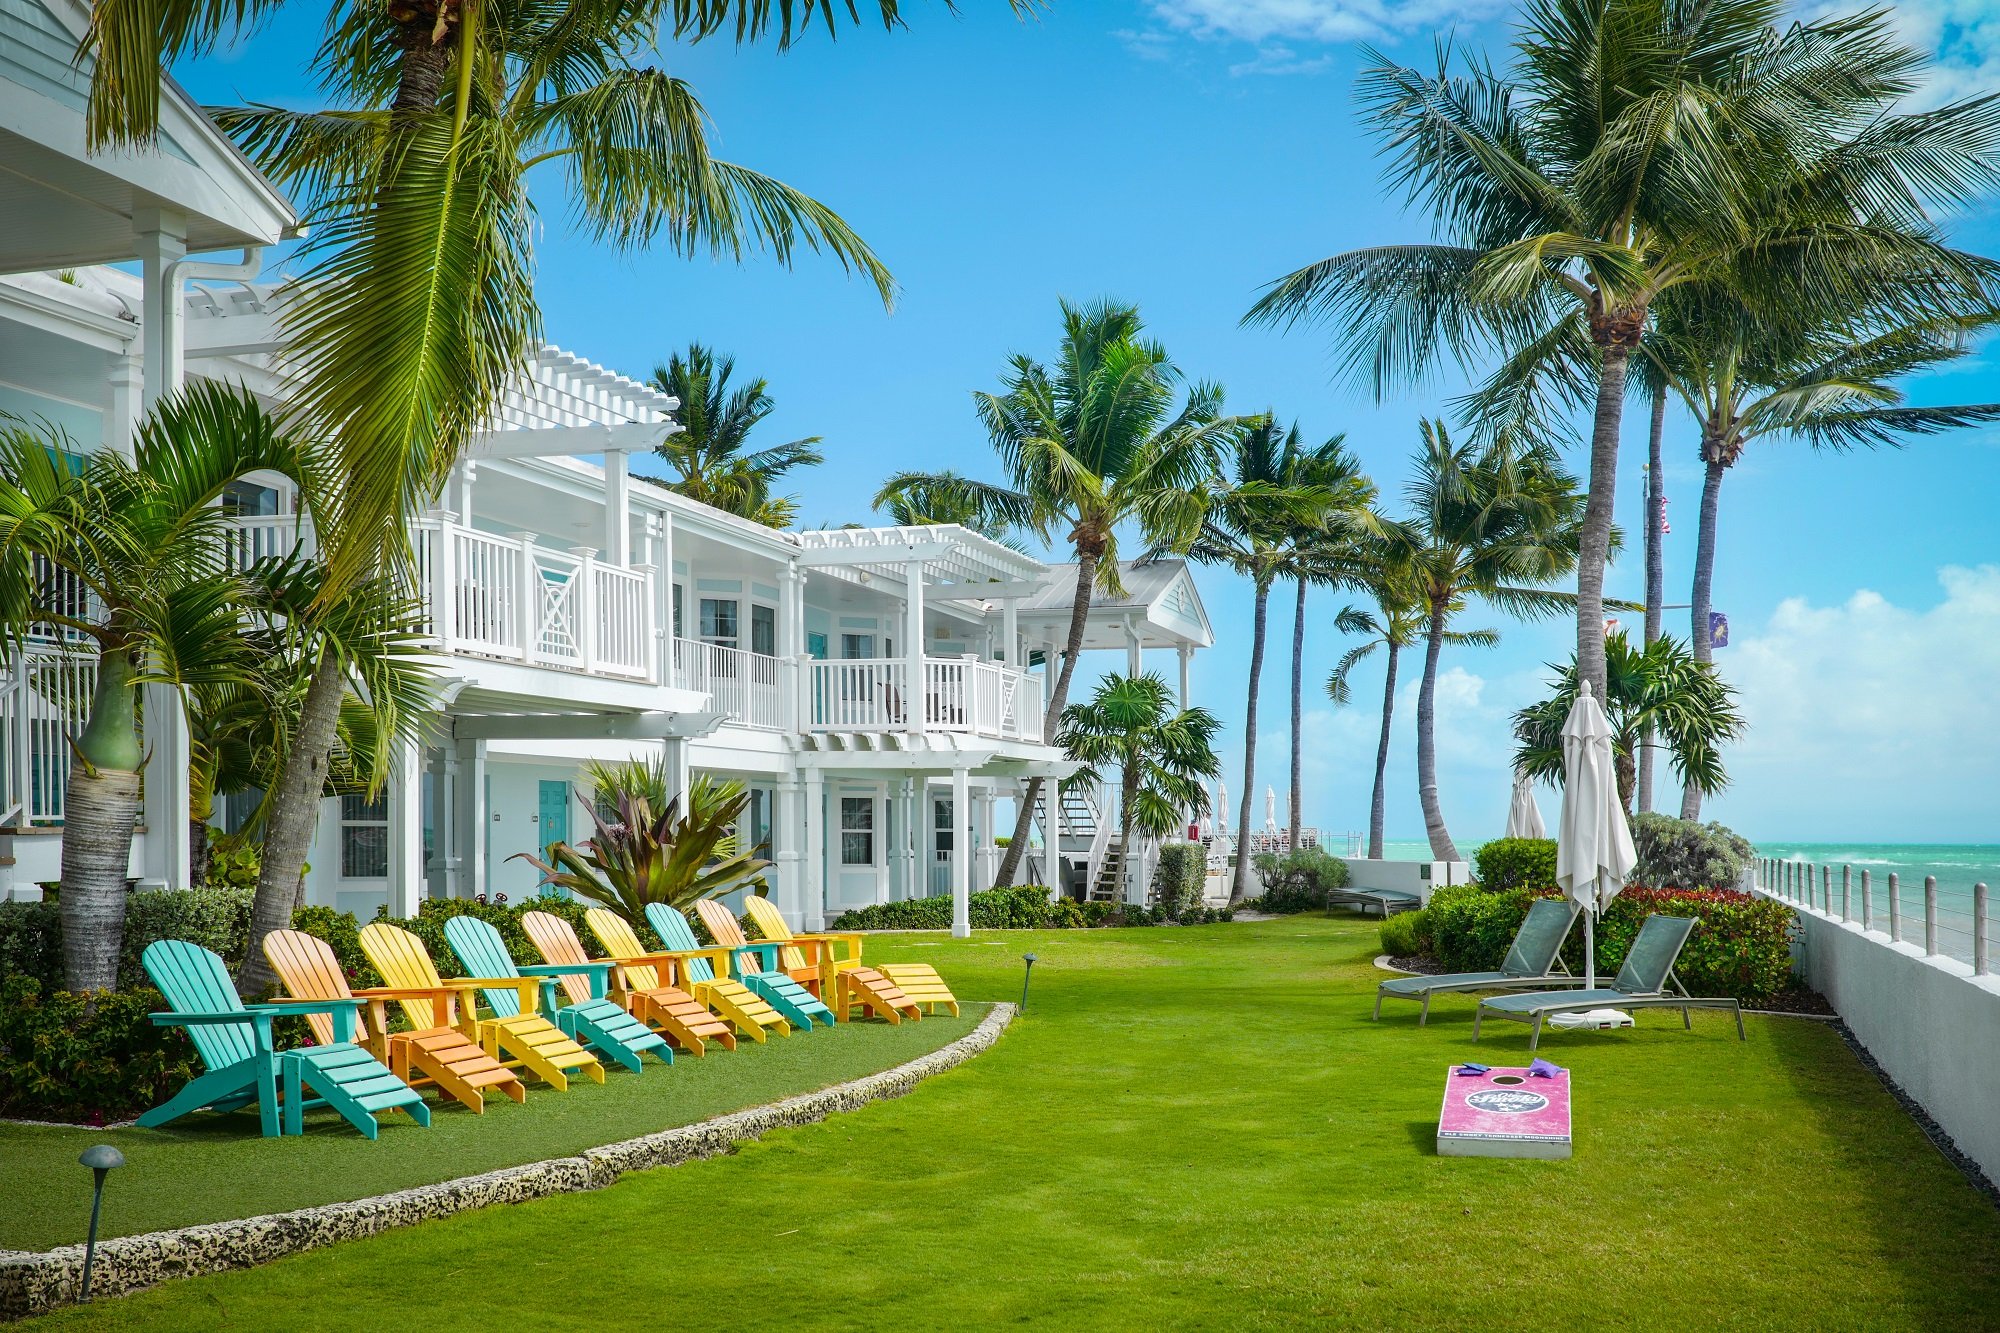 Southernmost resort facing the ocean; Key West resort lounging chairs facing the ocean by palm trees and a grass field.